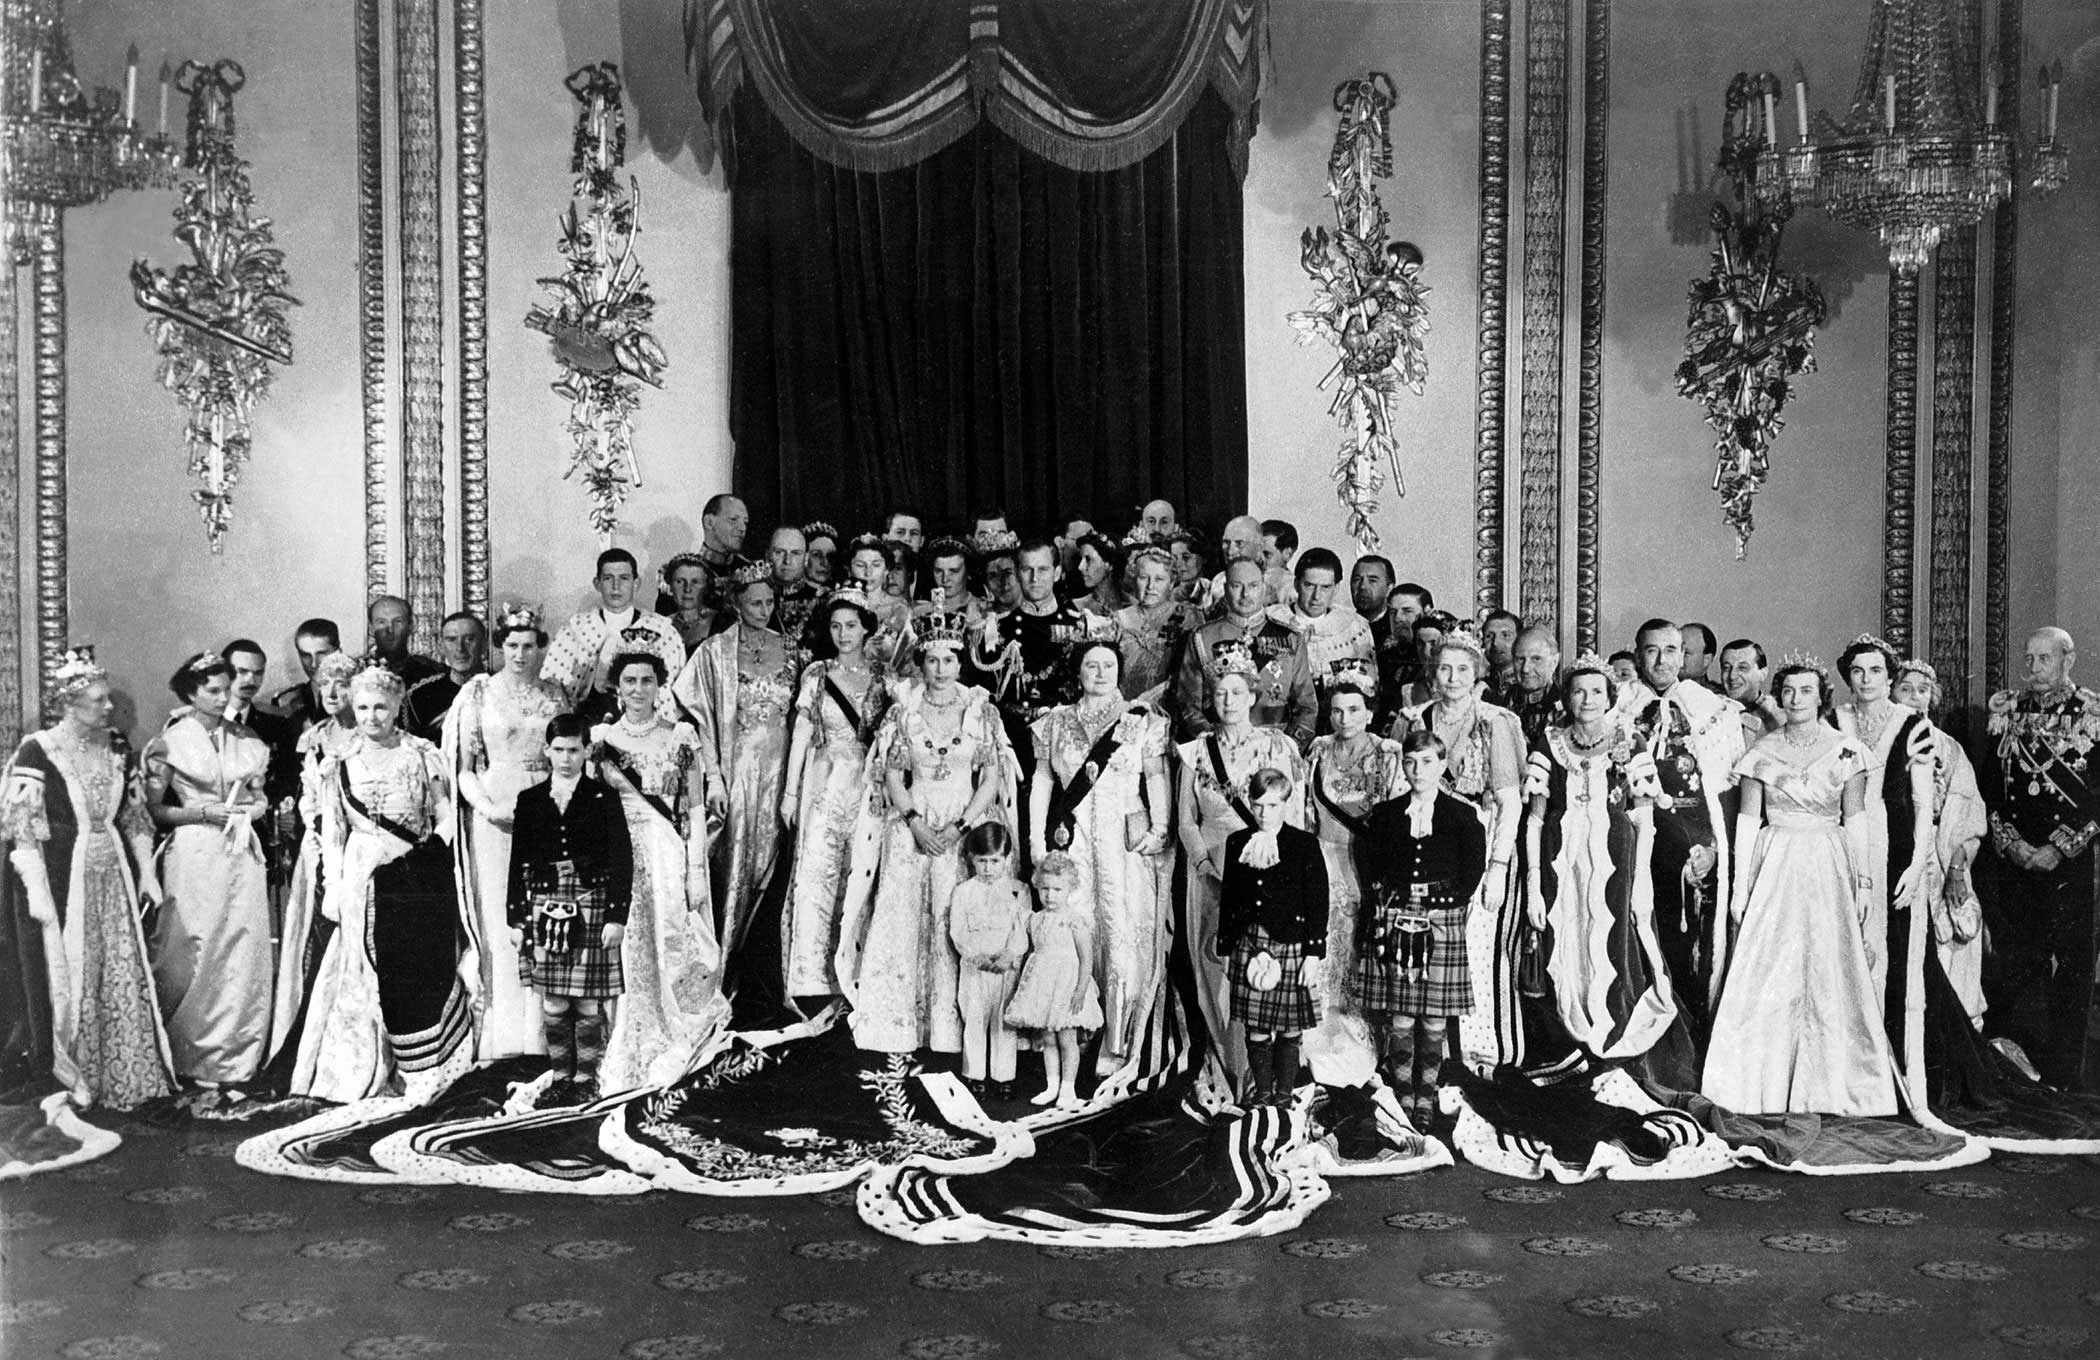 The royal family poses for a portrait on the day of the coronation, with Queen Elizabeth II in the center.